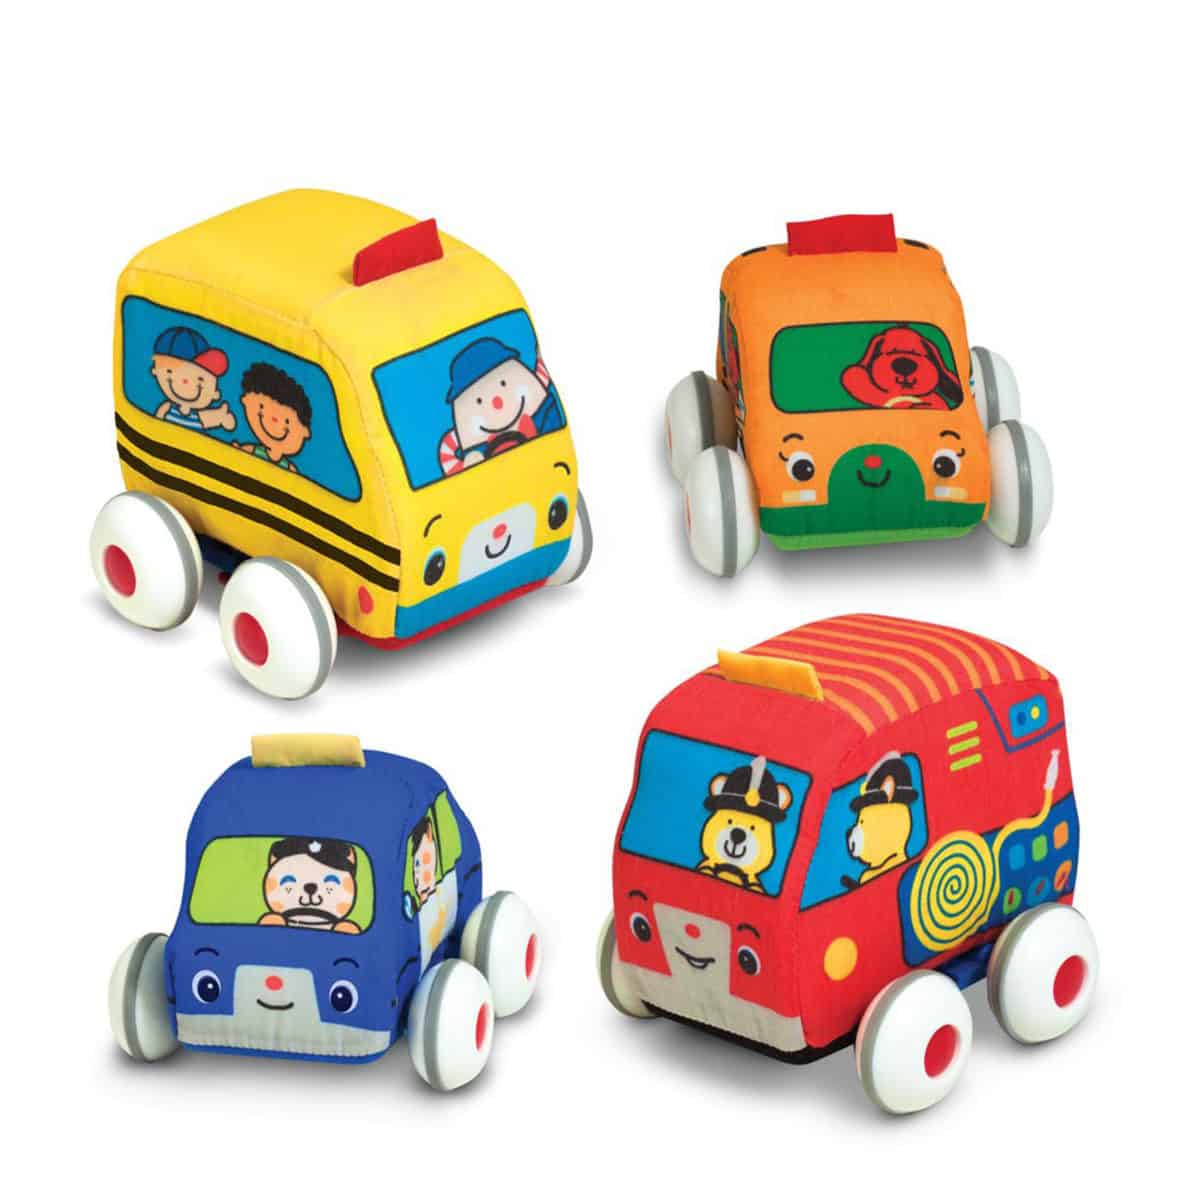 Pull Back Town Vehicles: Fun and Educational Playtime